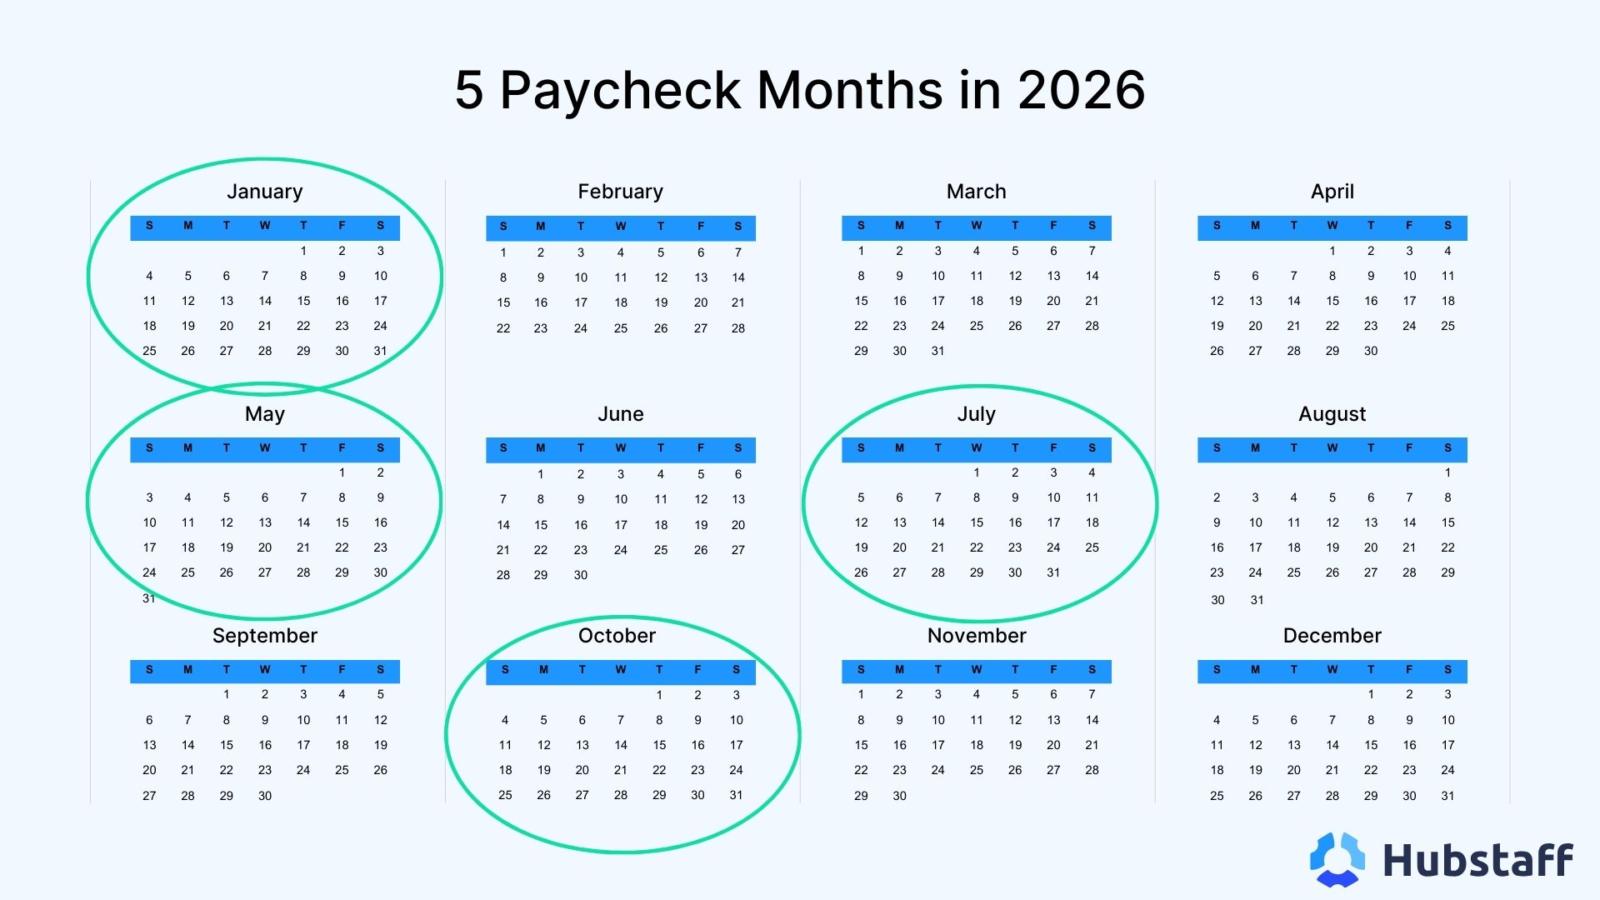 Five paycheck months in 2026